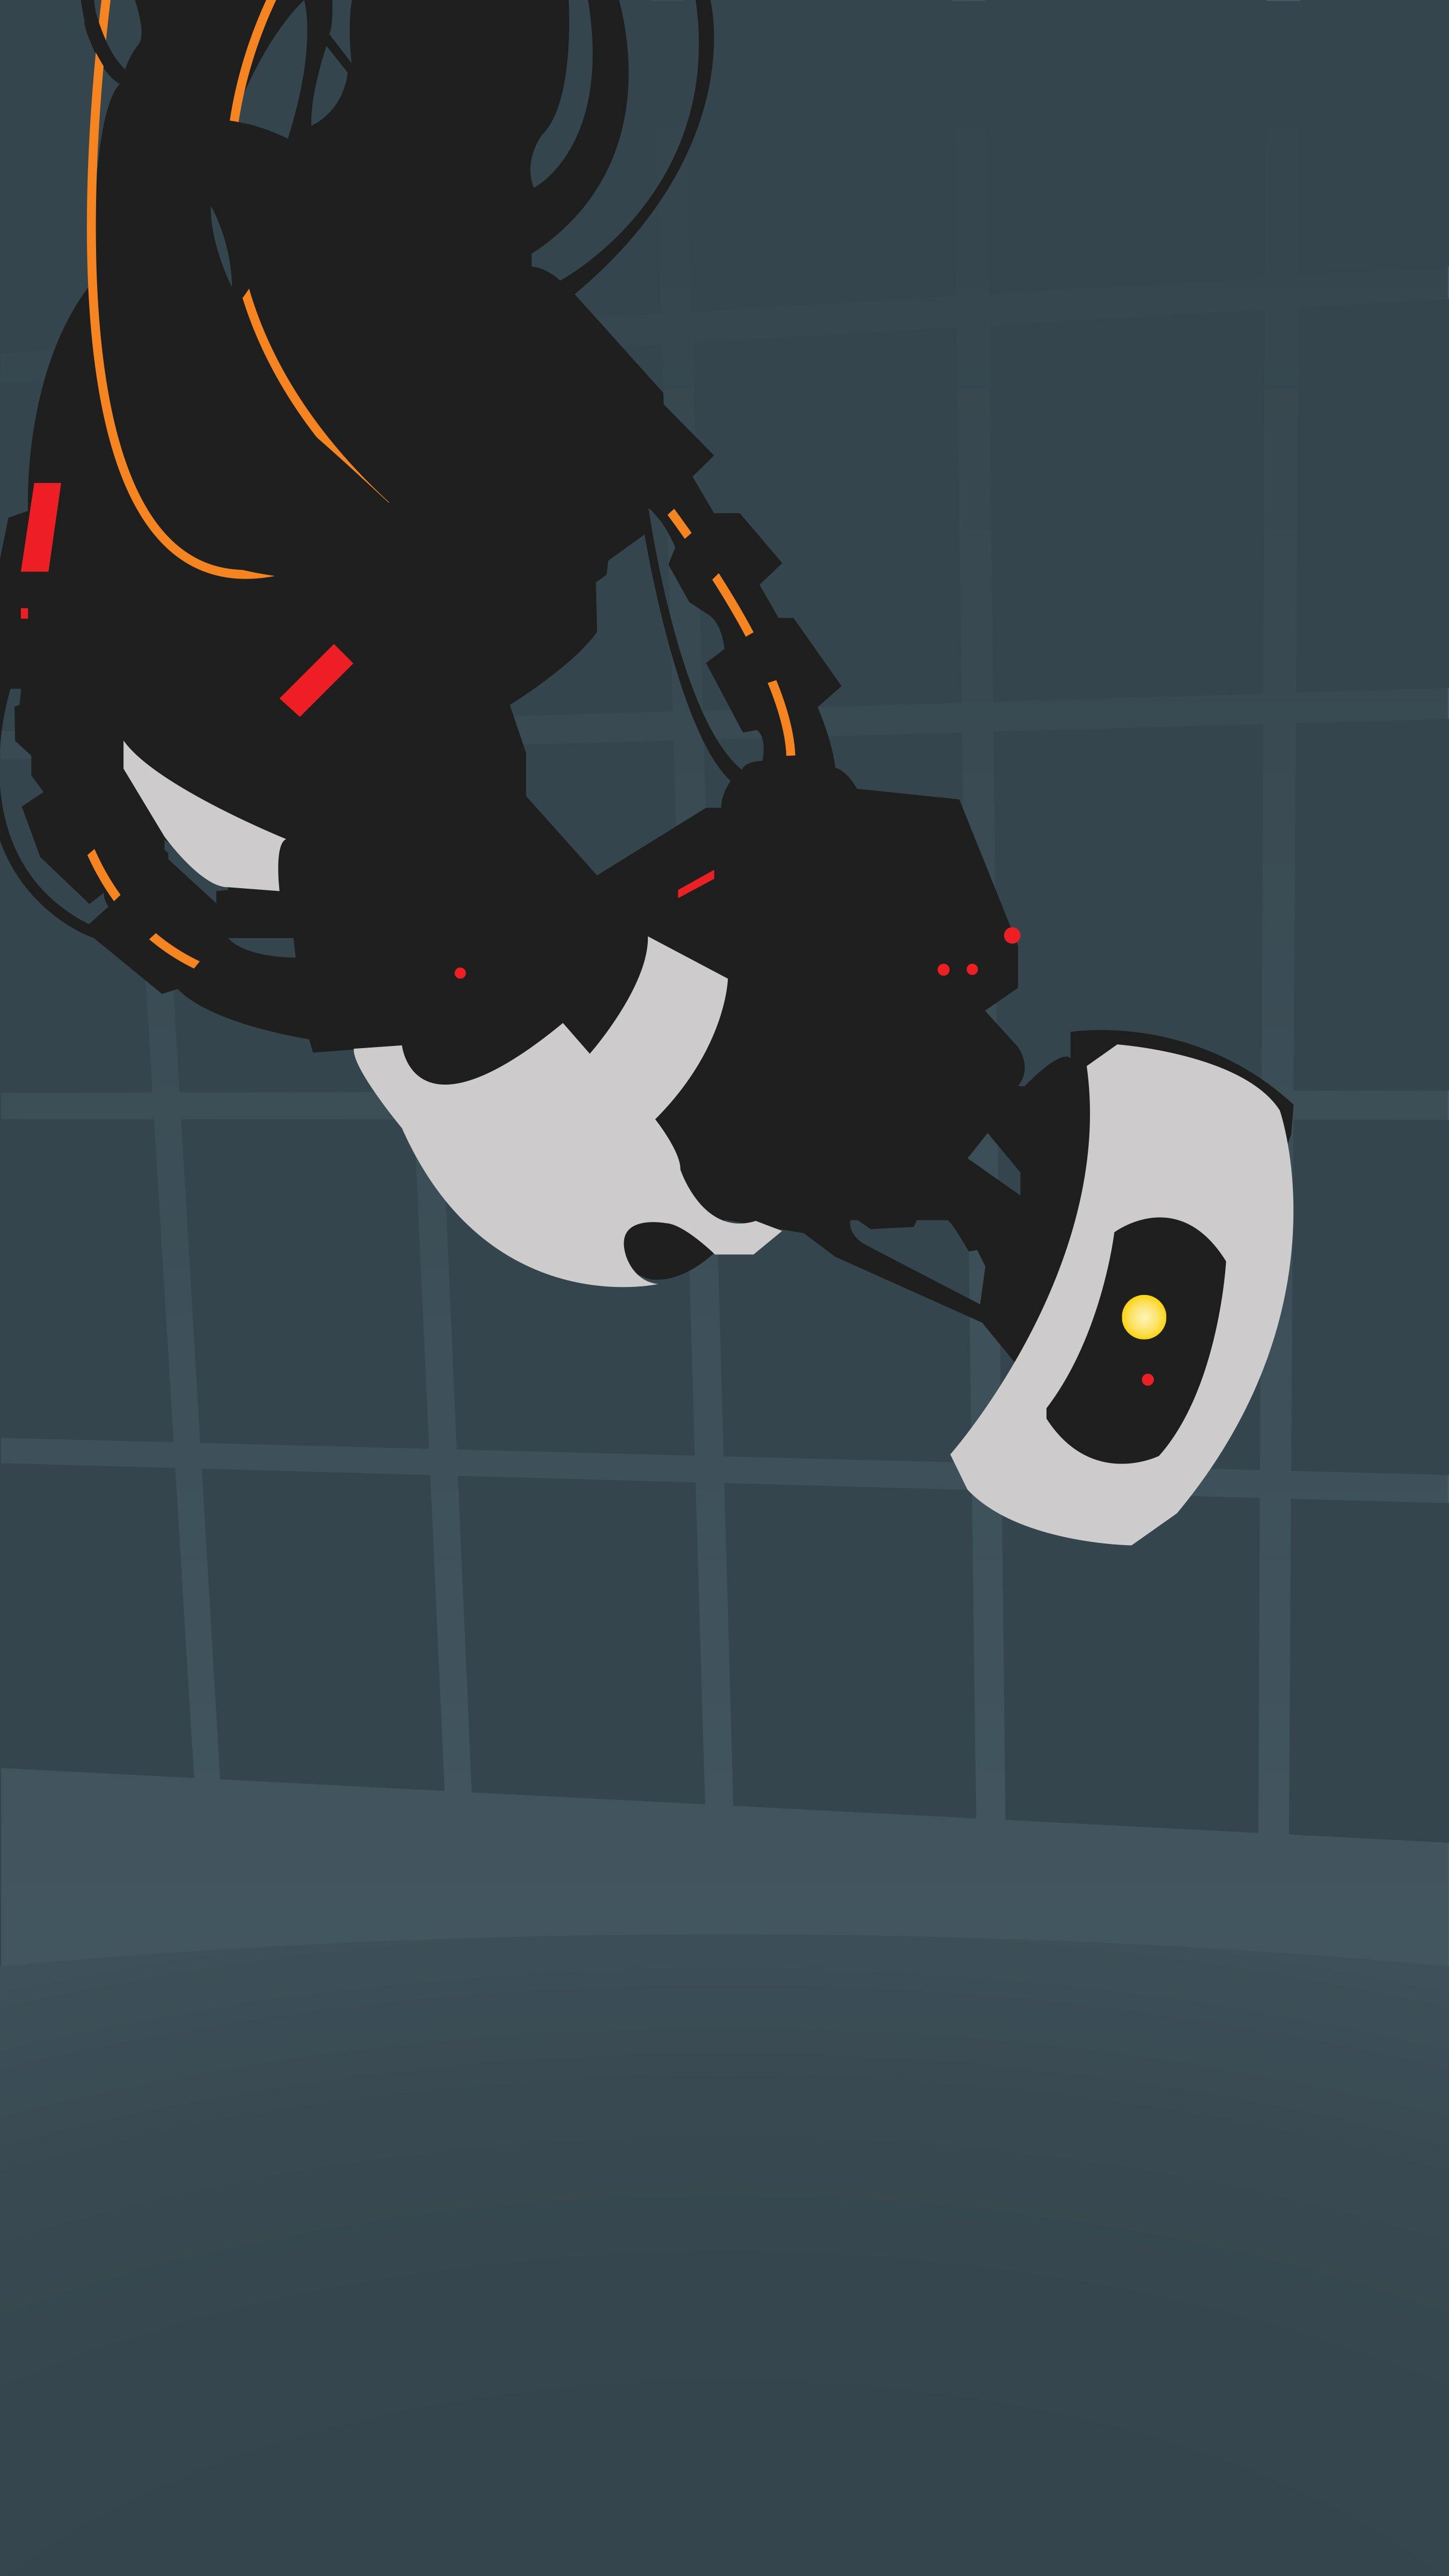 I made a minimalist wallpaper of GLaDoS from Portal 2